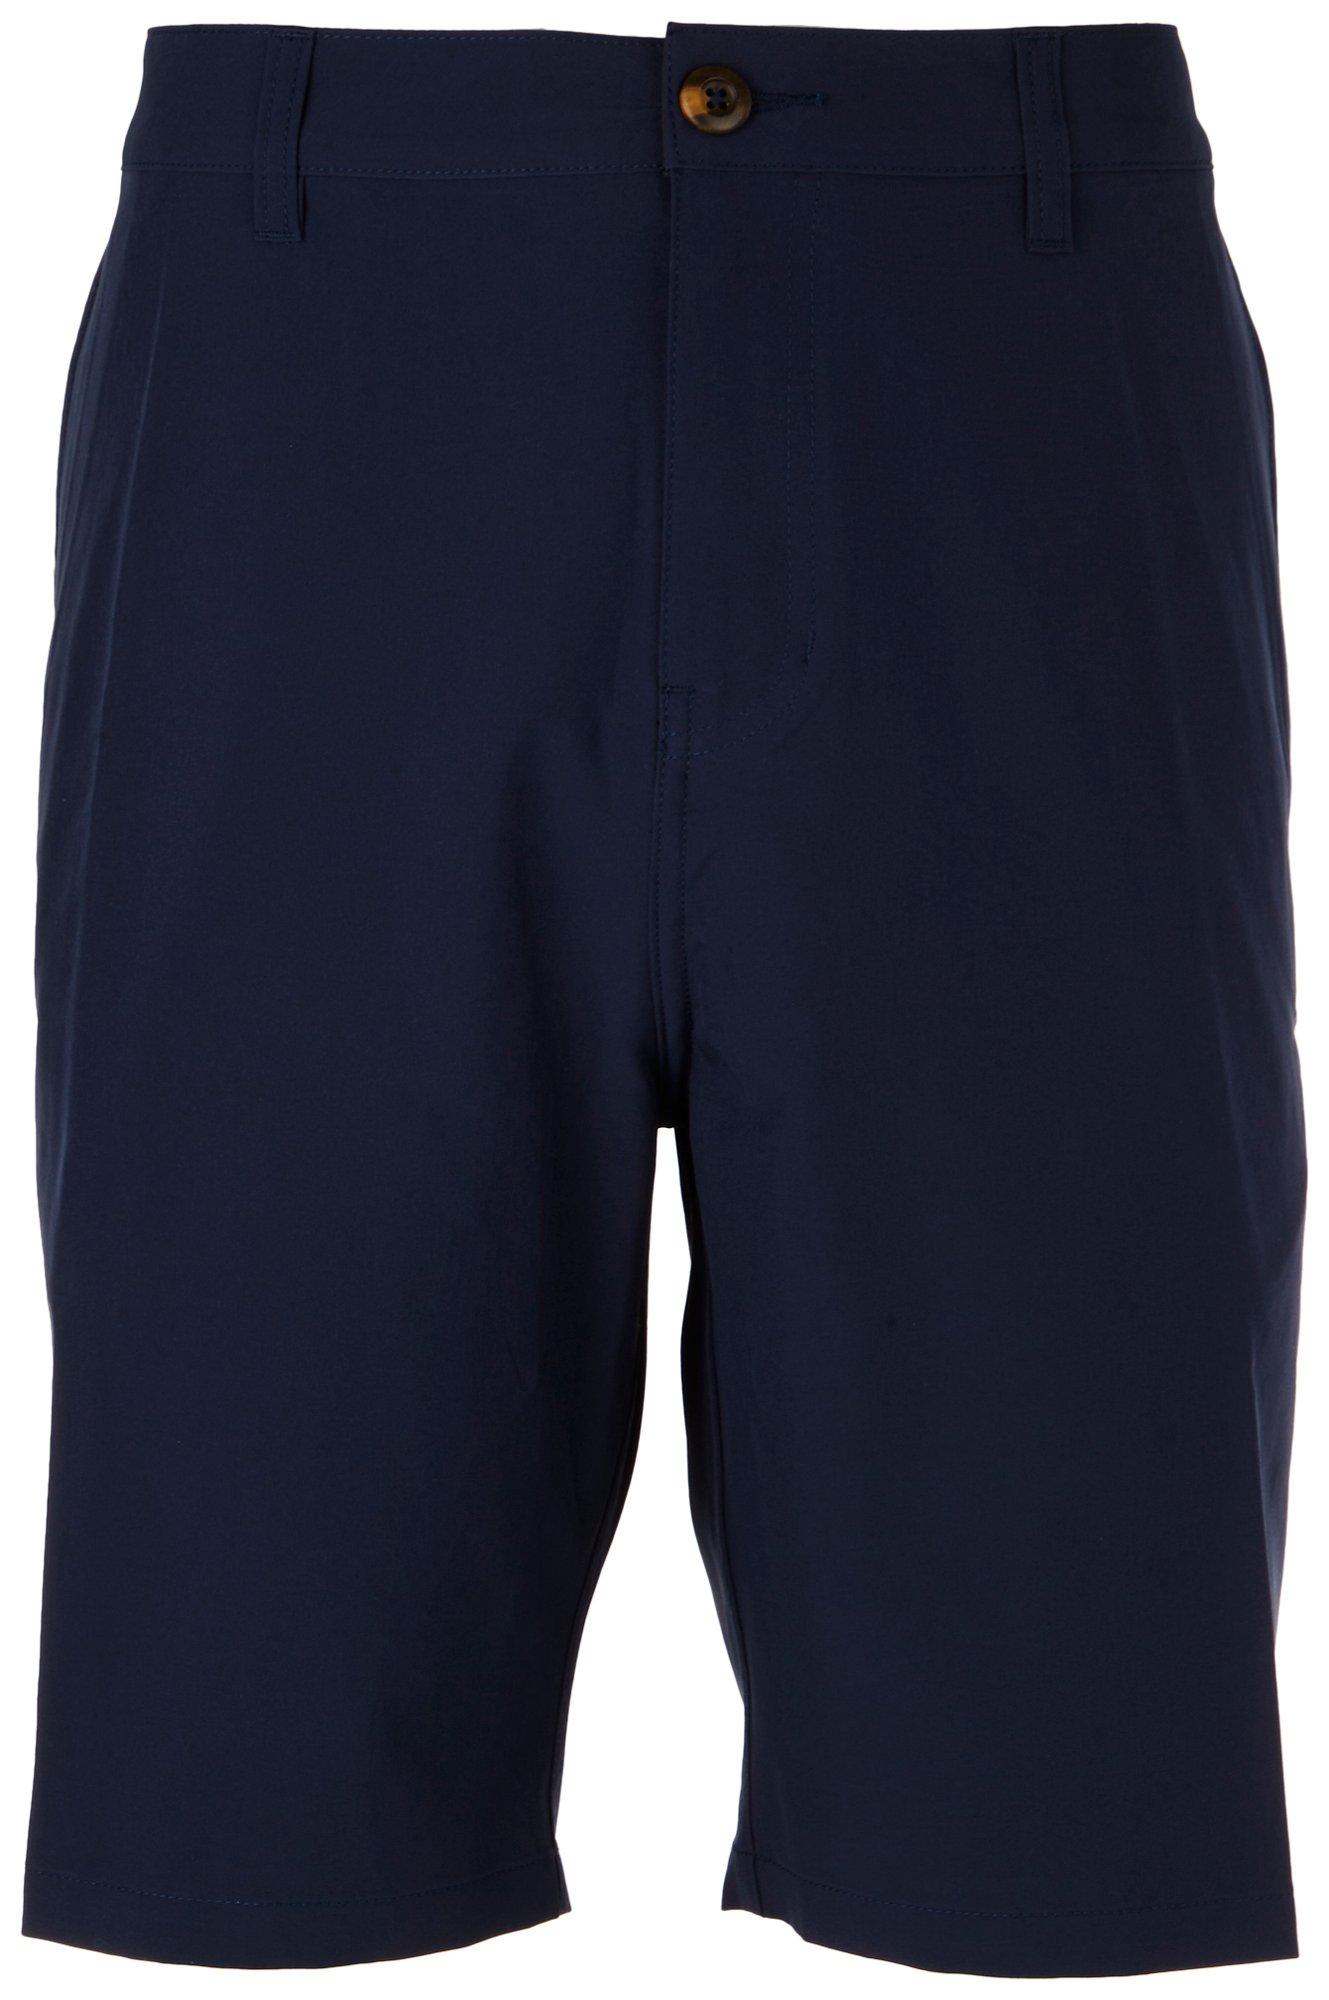 Mens 20in Amphibian Pull-On Woven Shorts